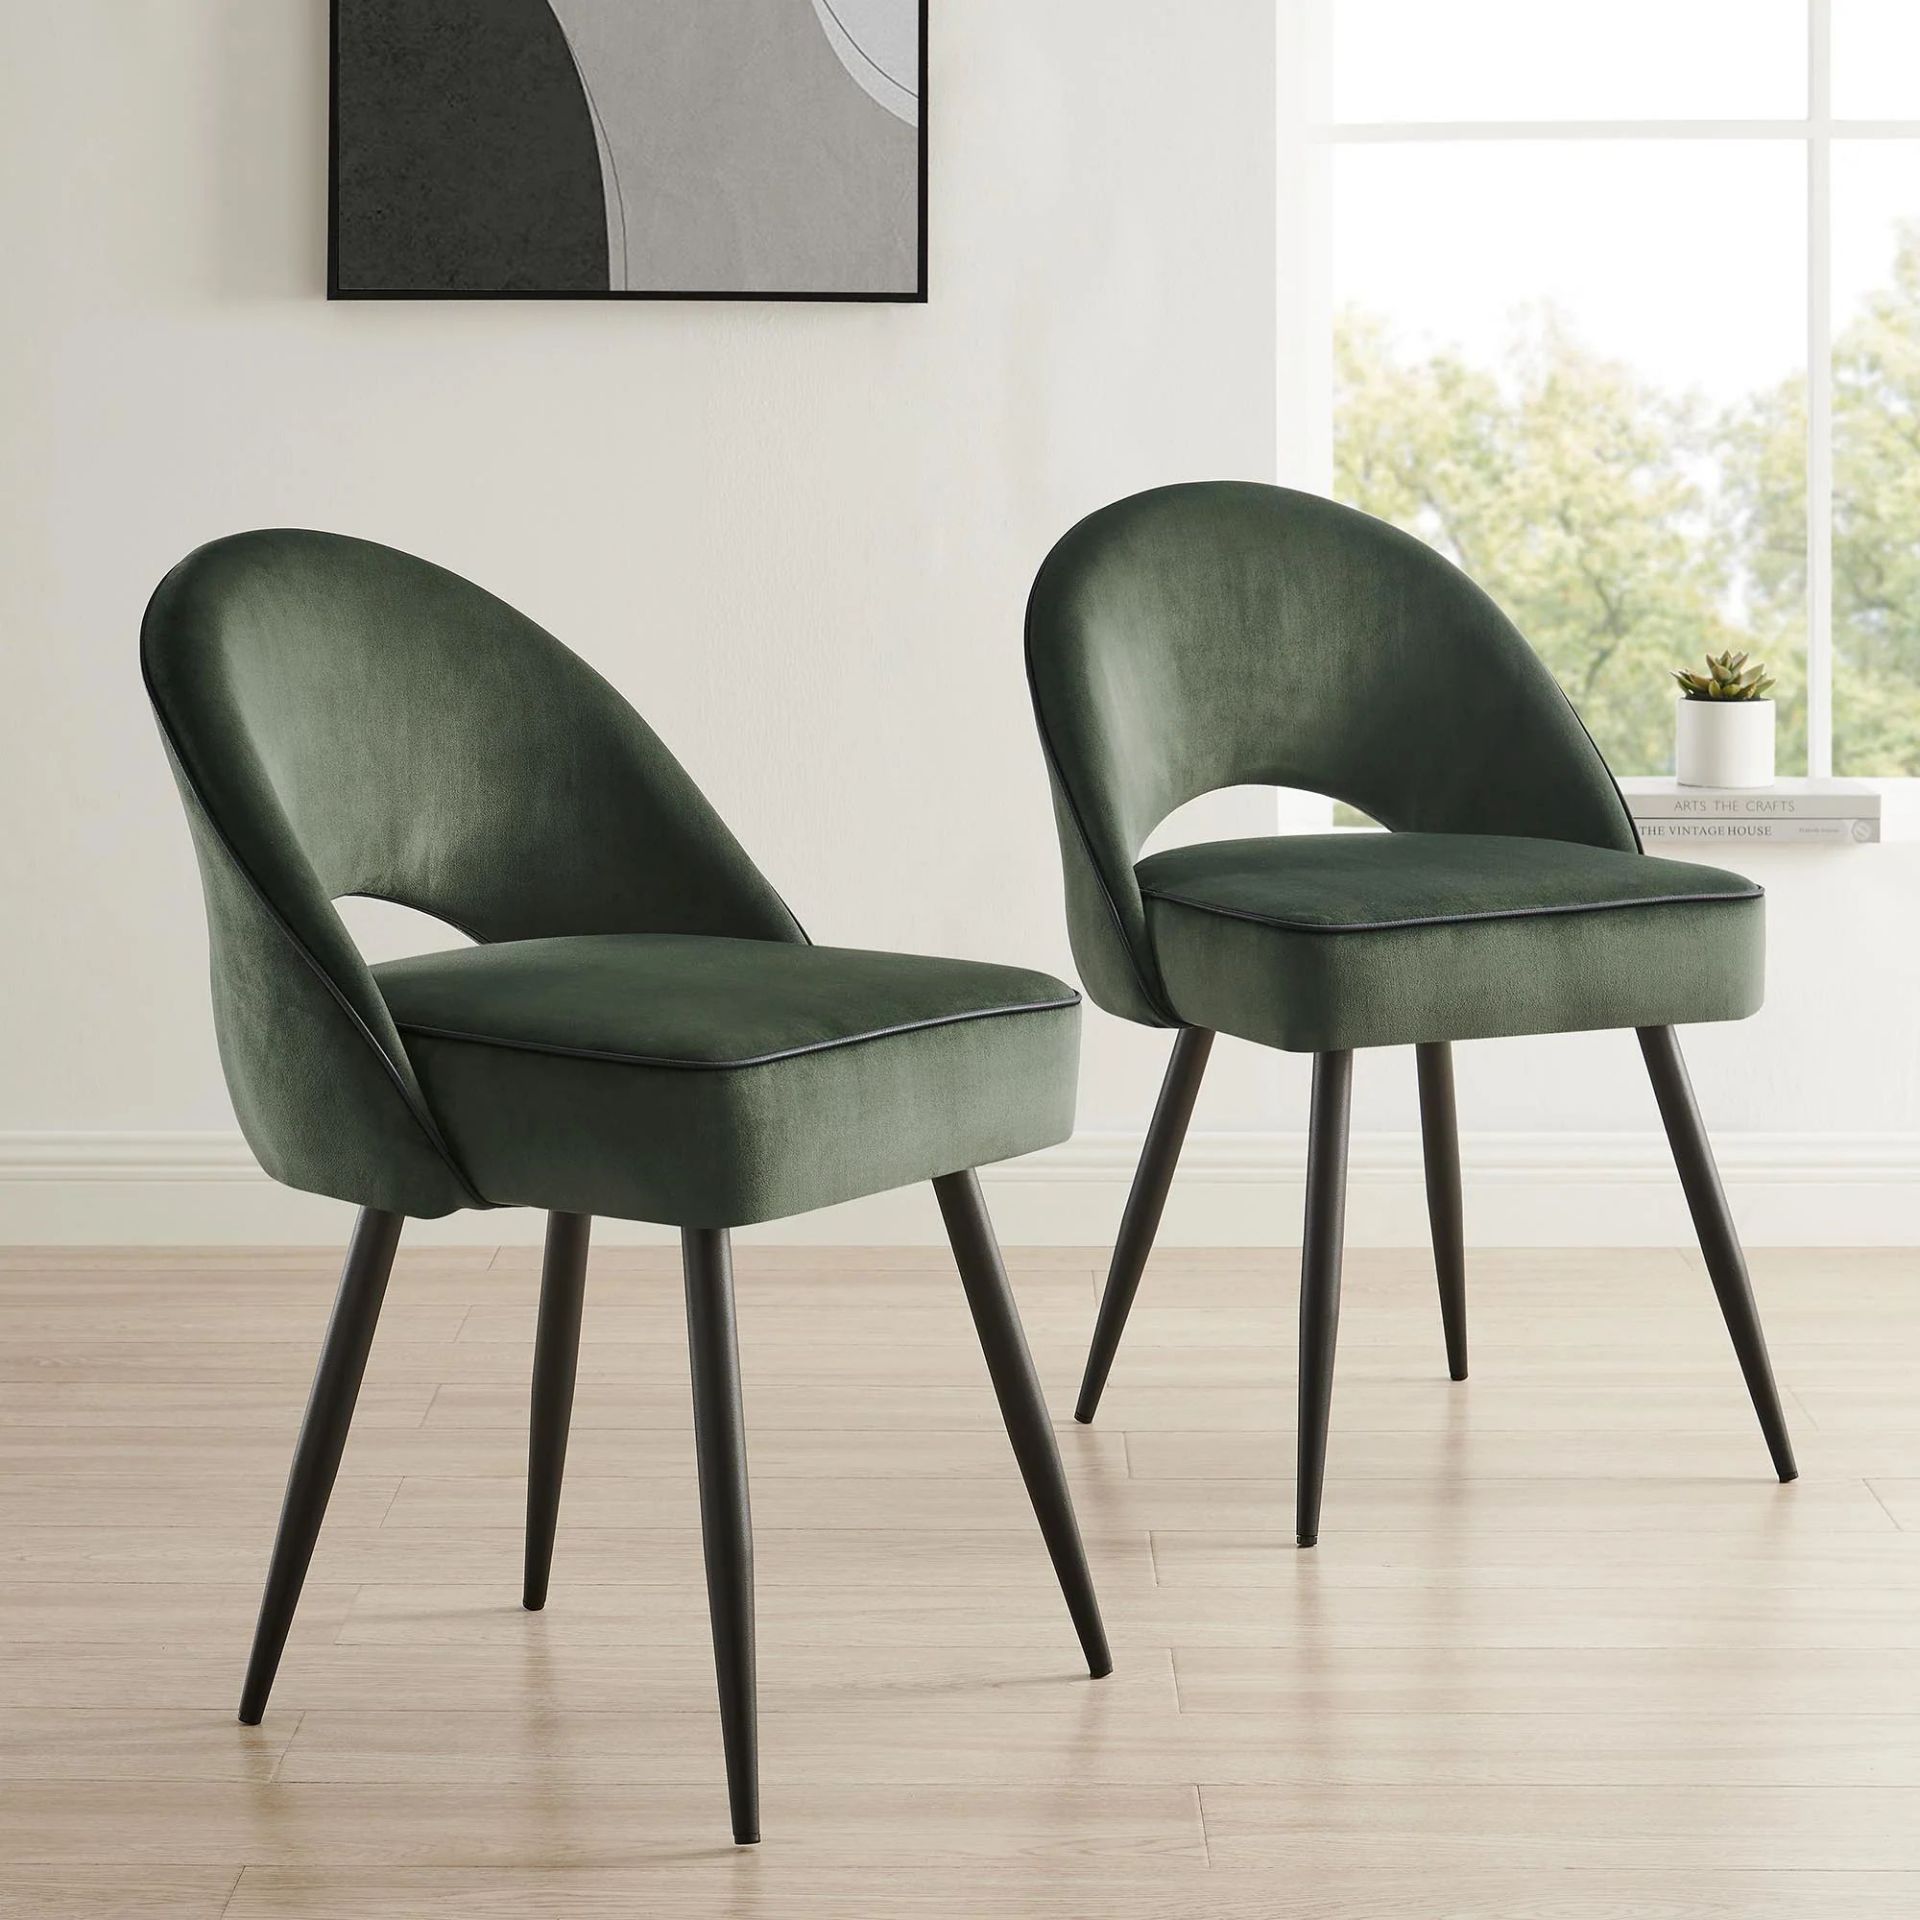 Oakley Set of 2 Dark Green Velvet Upholstered Dining Chairs with Contrast Piping. - ER29. RRP £239.